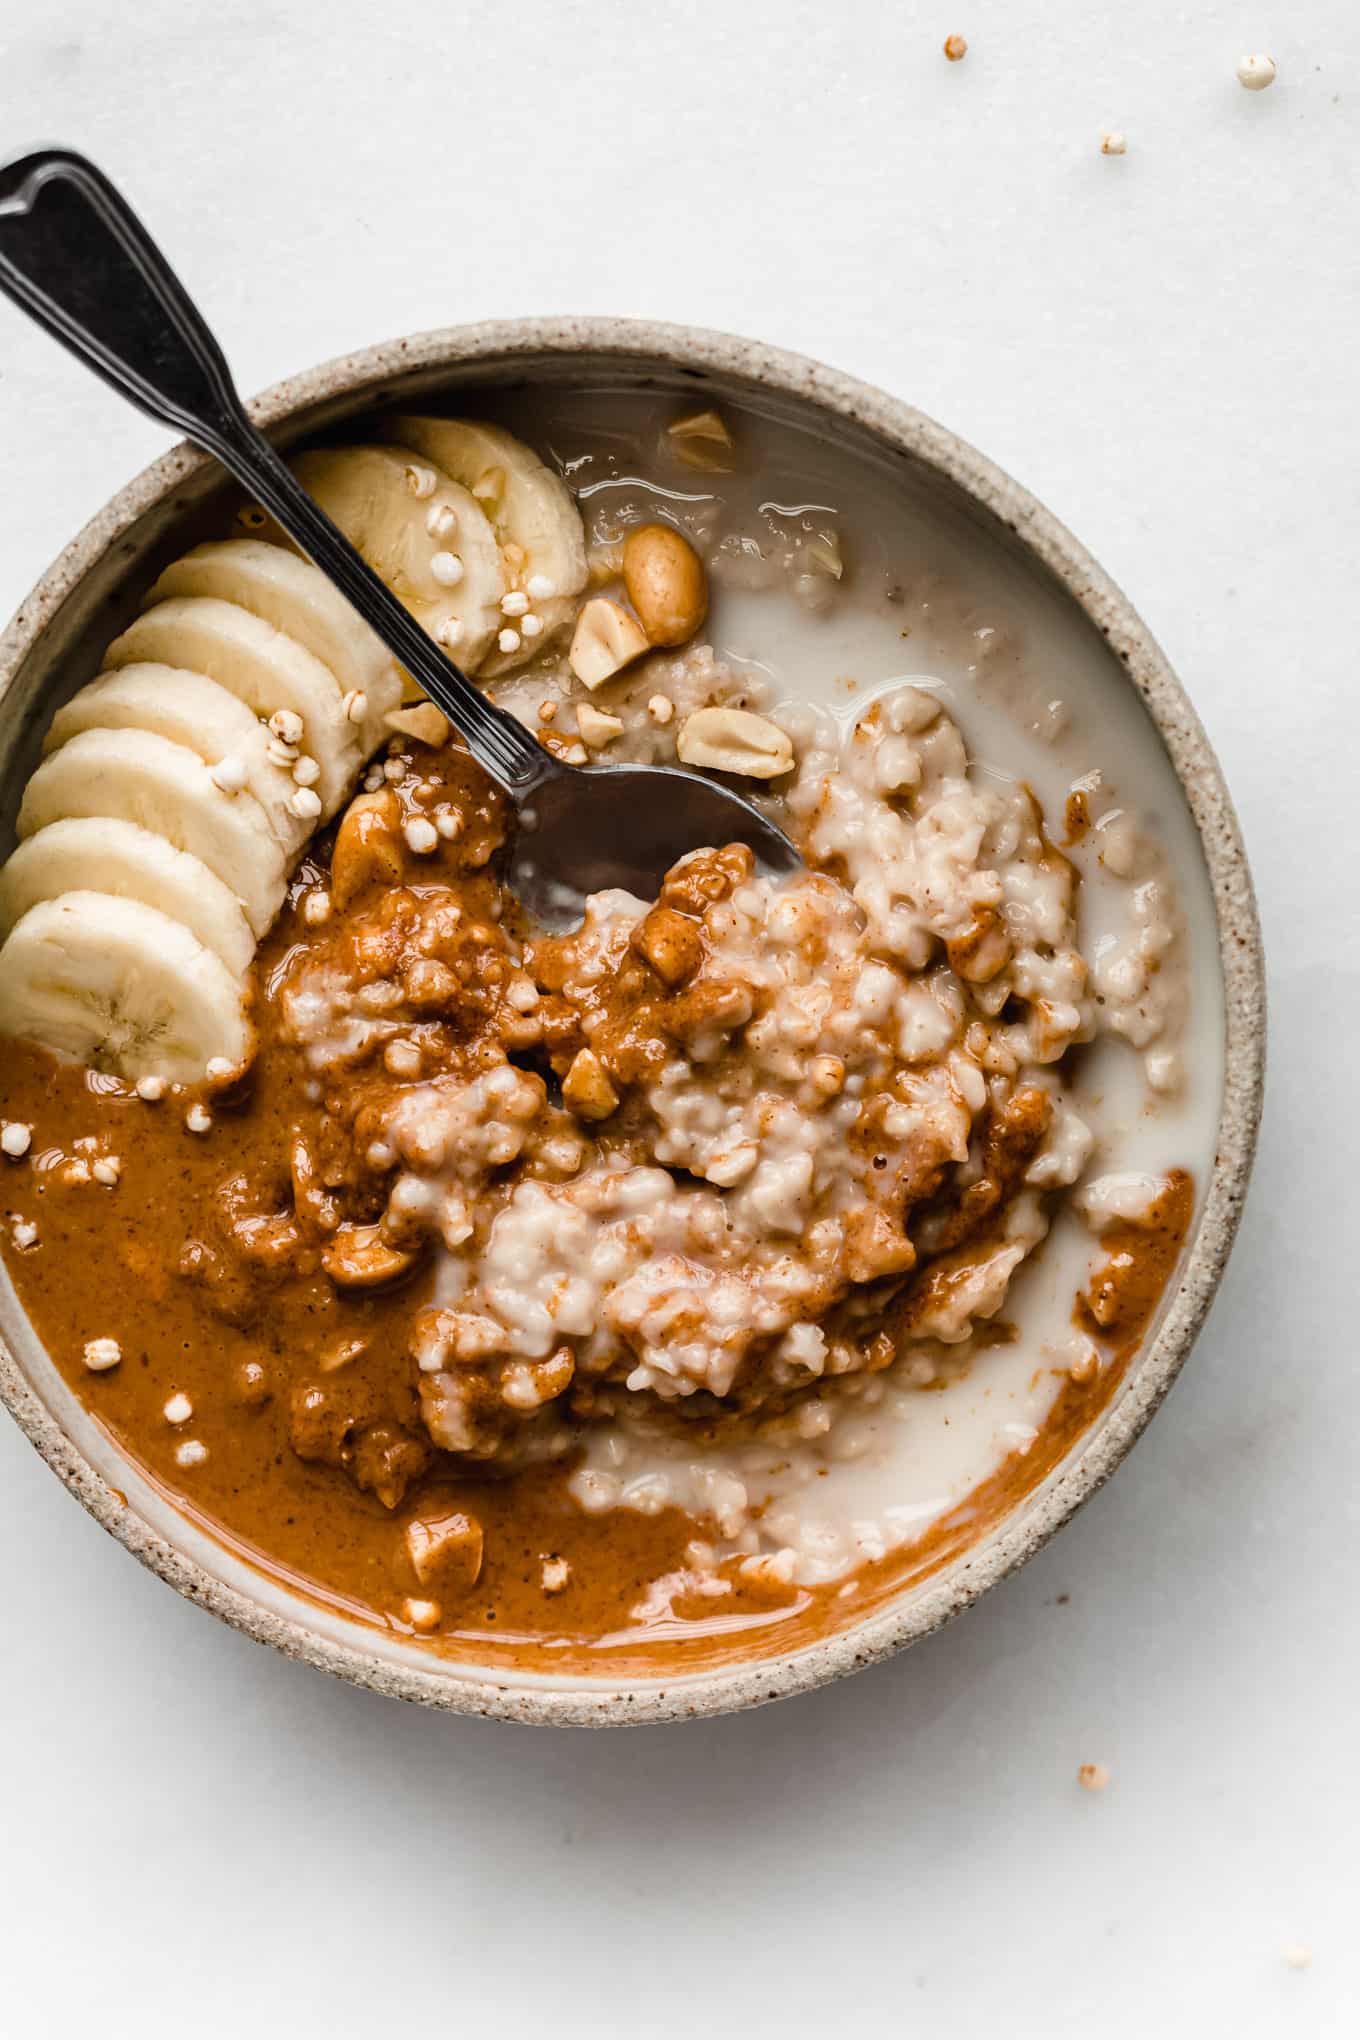 Oatmeal, Definition, Nutrition, Directions, & Facts